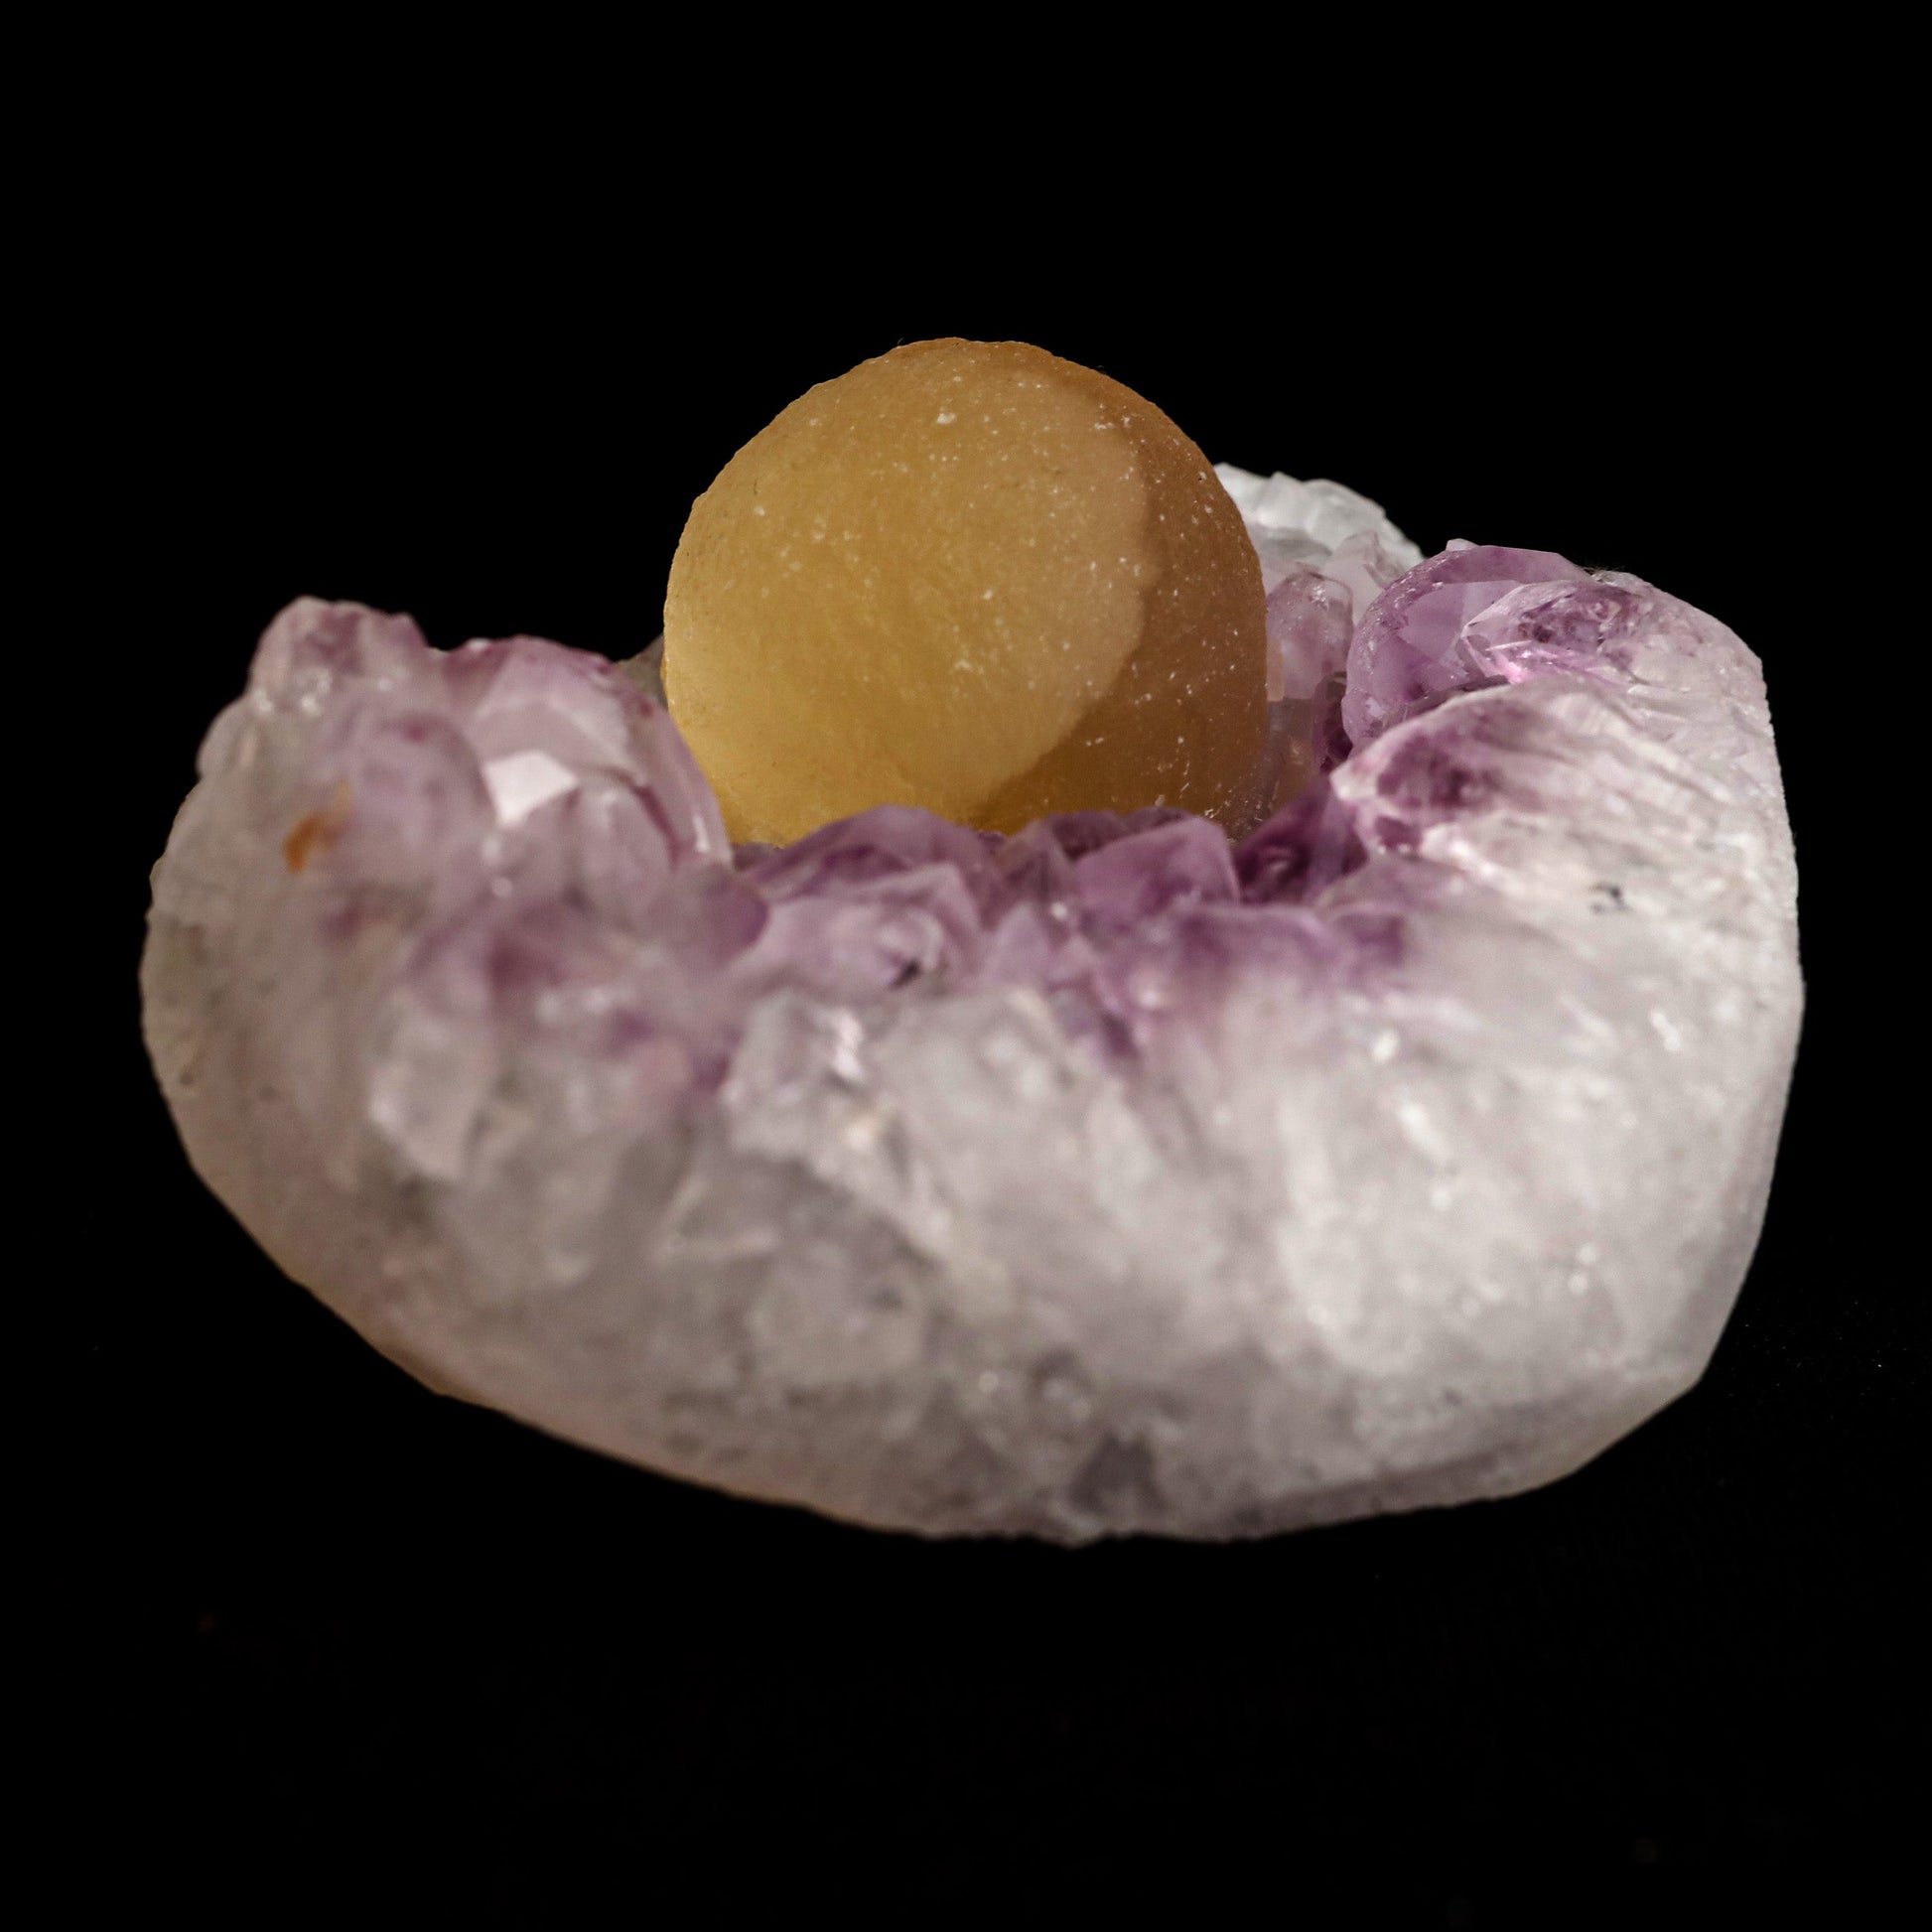 Fluorite Botryoidal Shaded on Amethyst Natural Mineral Specimen # B 5…  https://www.superbminerals.us/products/fluorite-botryoidal-shaded-on-amethyst-natural-mineral-specimen-b-5067  Features: A prominent botryoidal "ball" of Fluorite perches on light purple coloured Amethyst and soft lilac coloured Chalcedony matrix in this specimen. The Fluorite has a gorgeous golden tone throughout, and when the "ball" is lighted, the colour GLOWS. A supplementary Fluorite sphere at a lesser size 